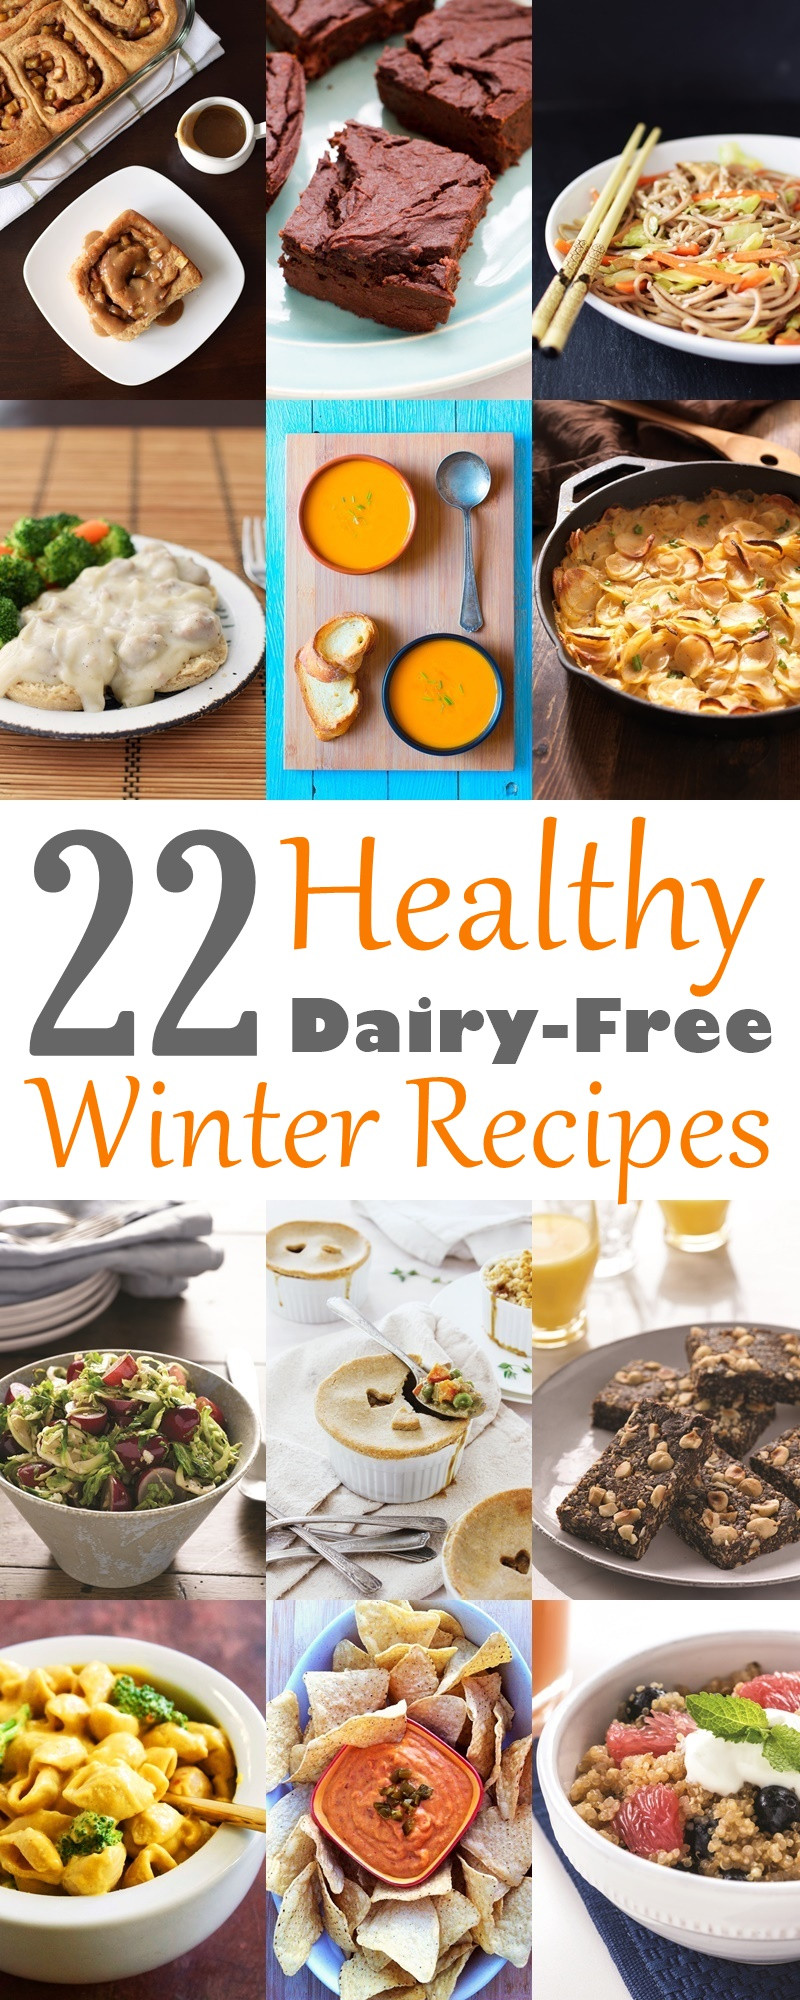 Healthy Dairy Free Recipes
 22 Healthy Winter Recipes to Ring in the New Year All